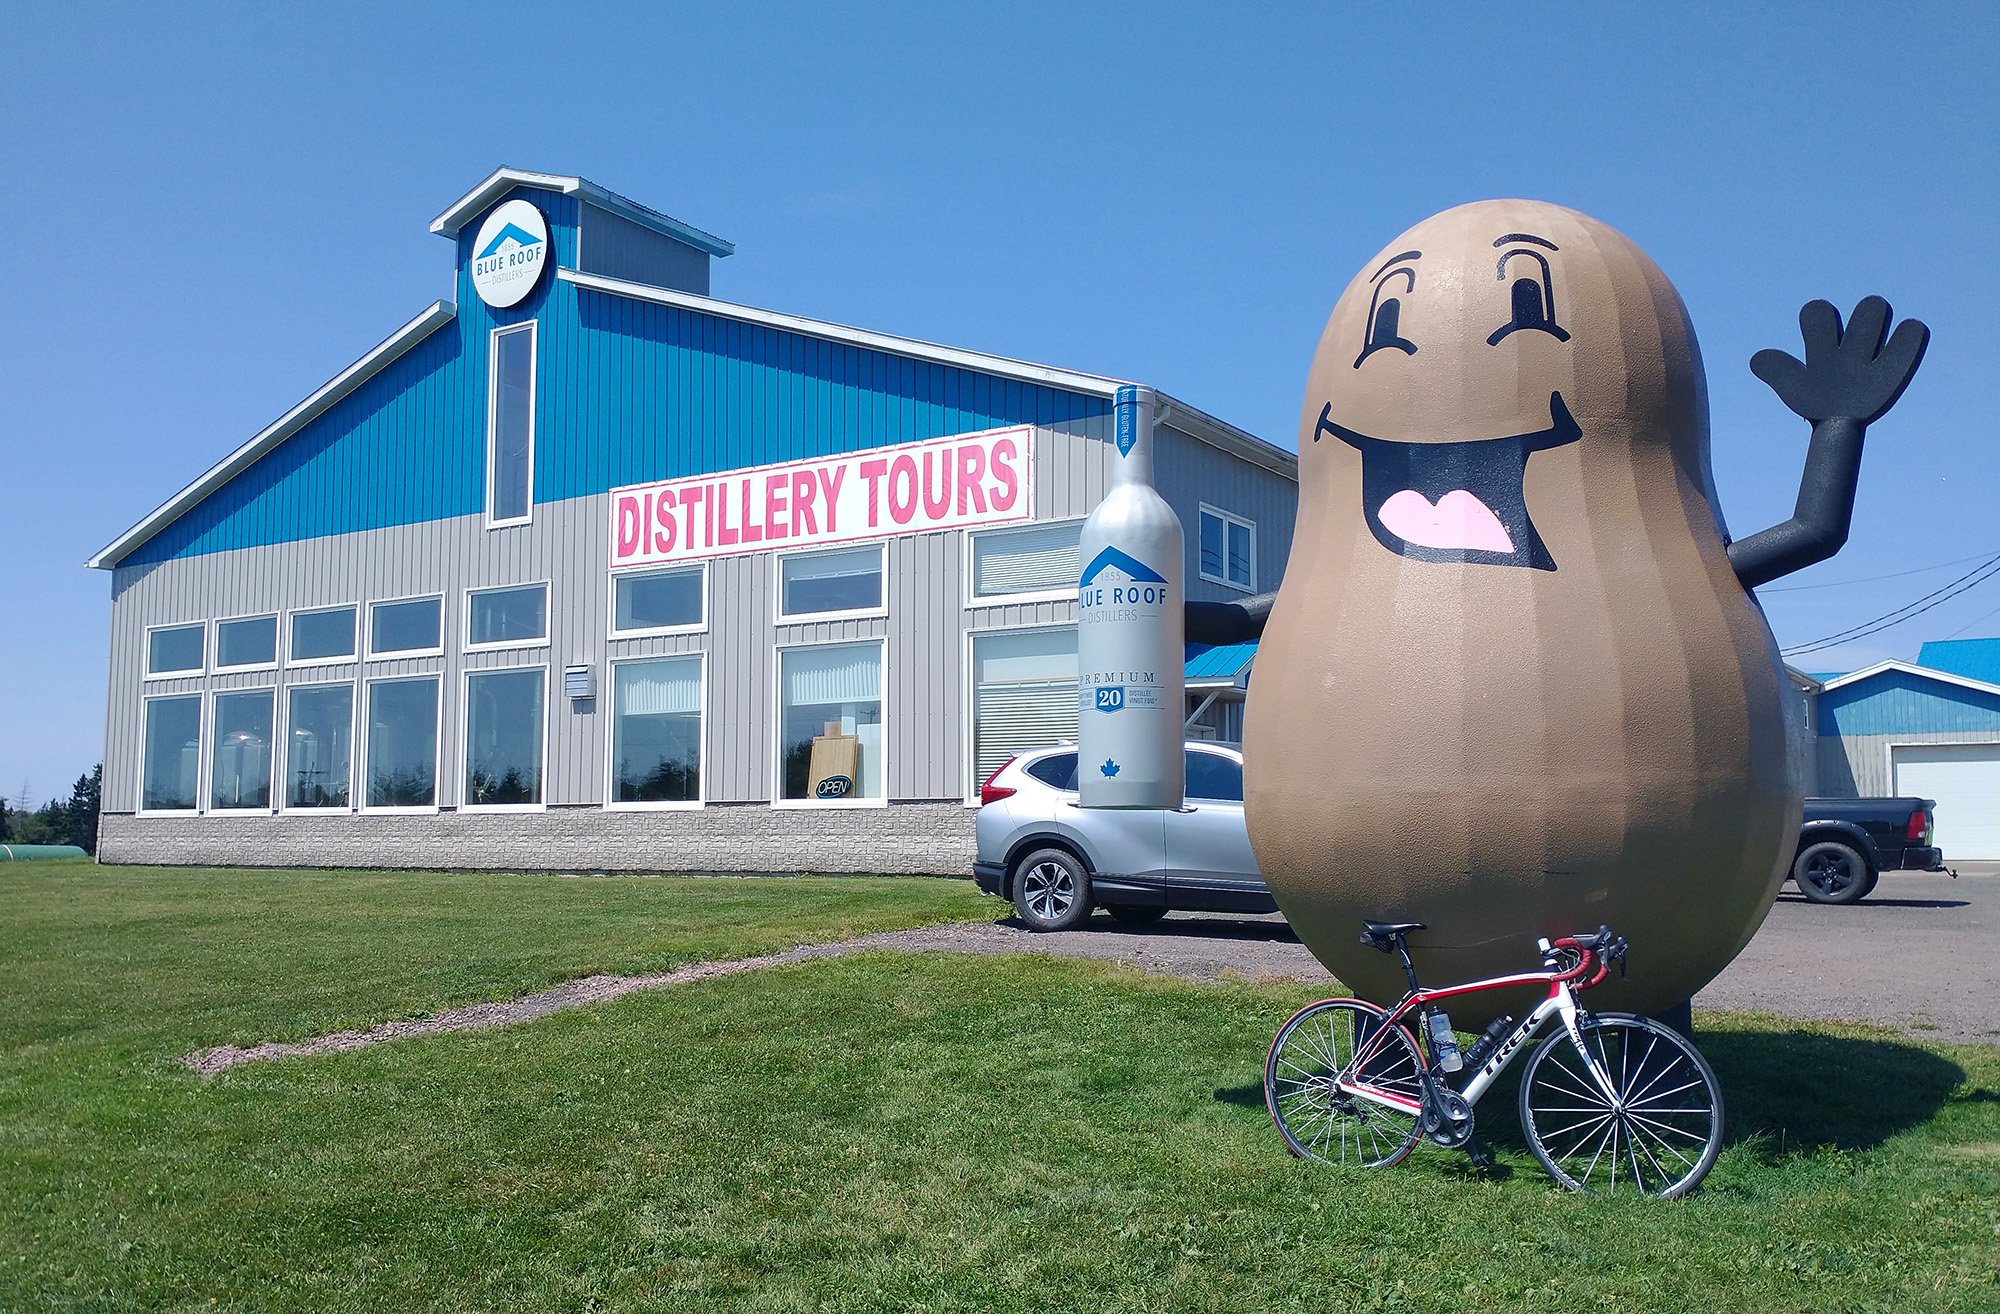 Huge potato next to this distillery. Everyone thought it was a peanut. Now I want peanut liquor...